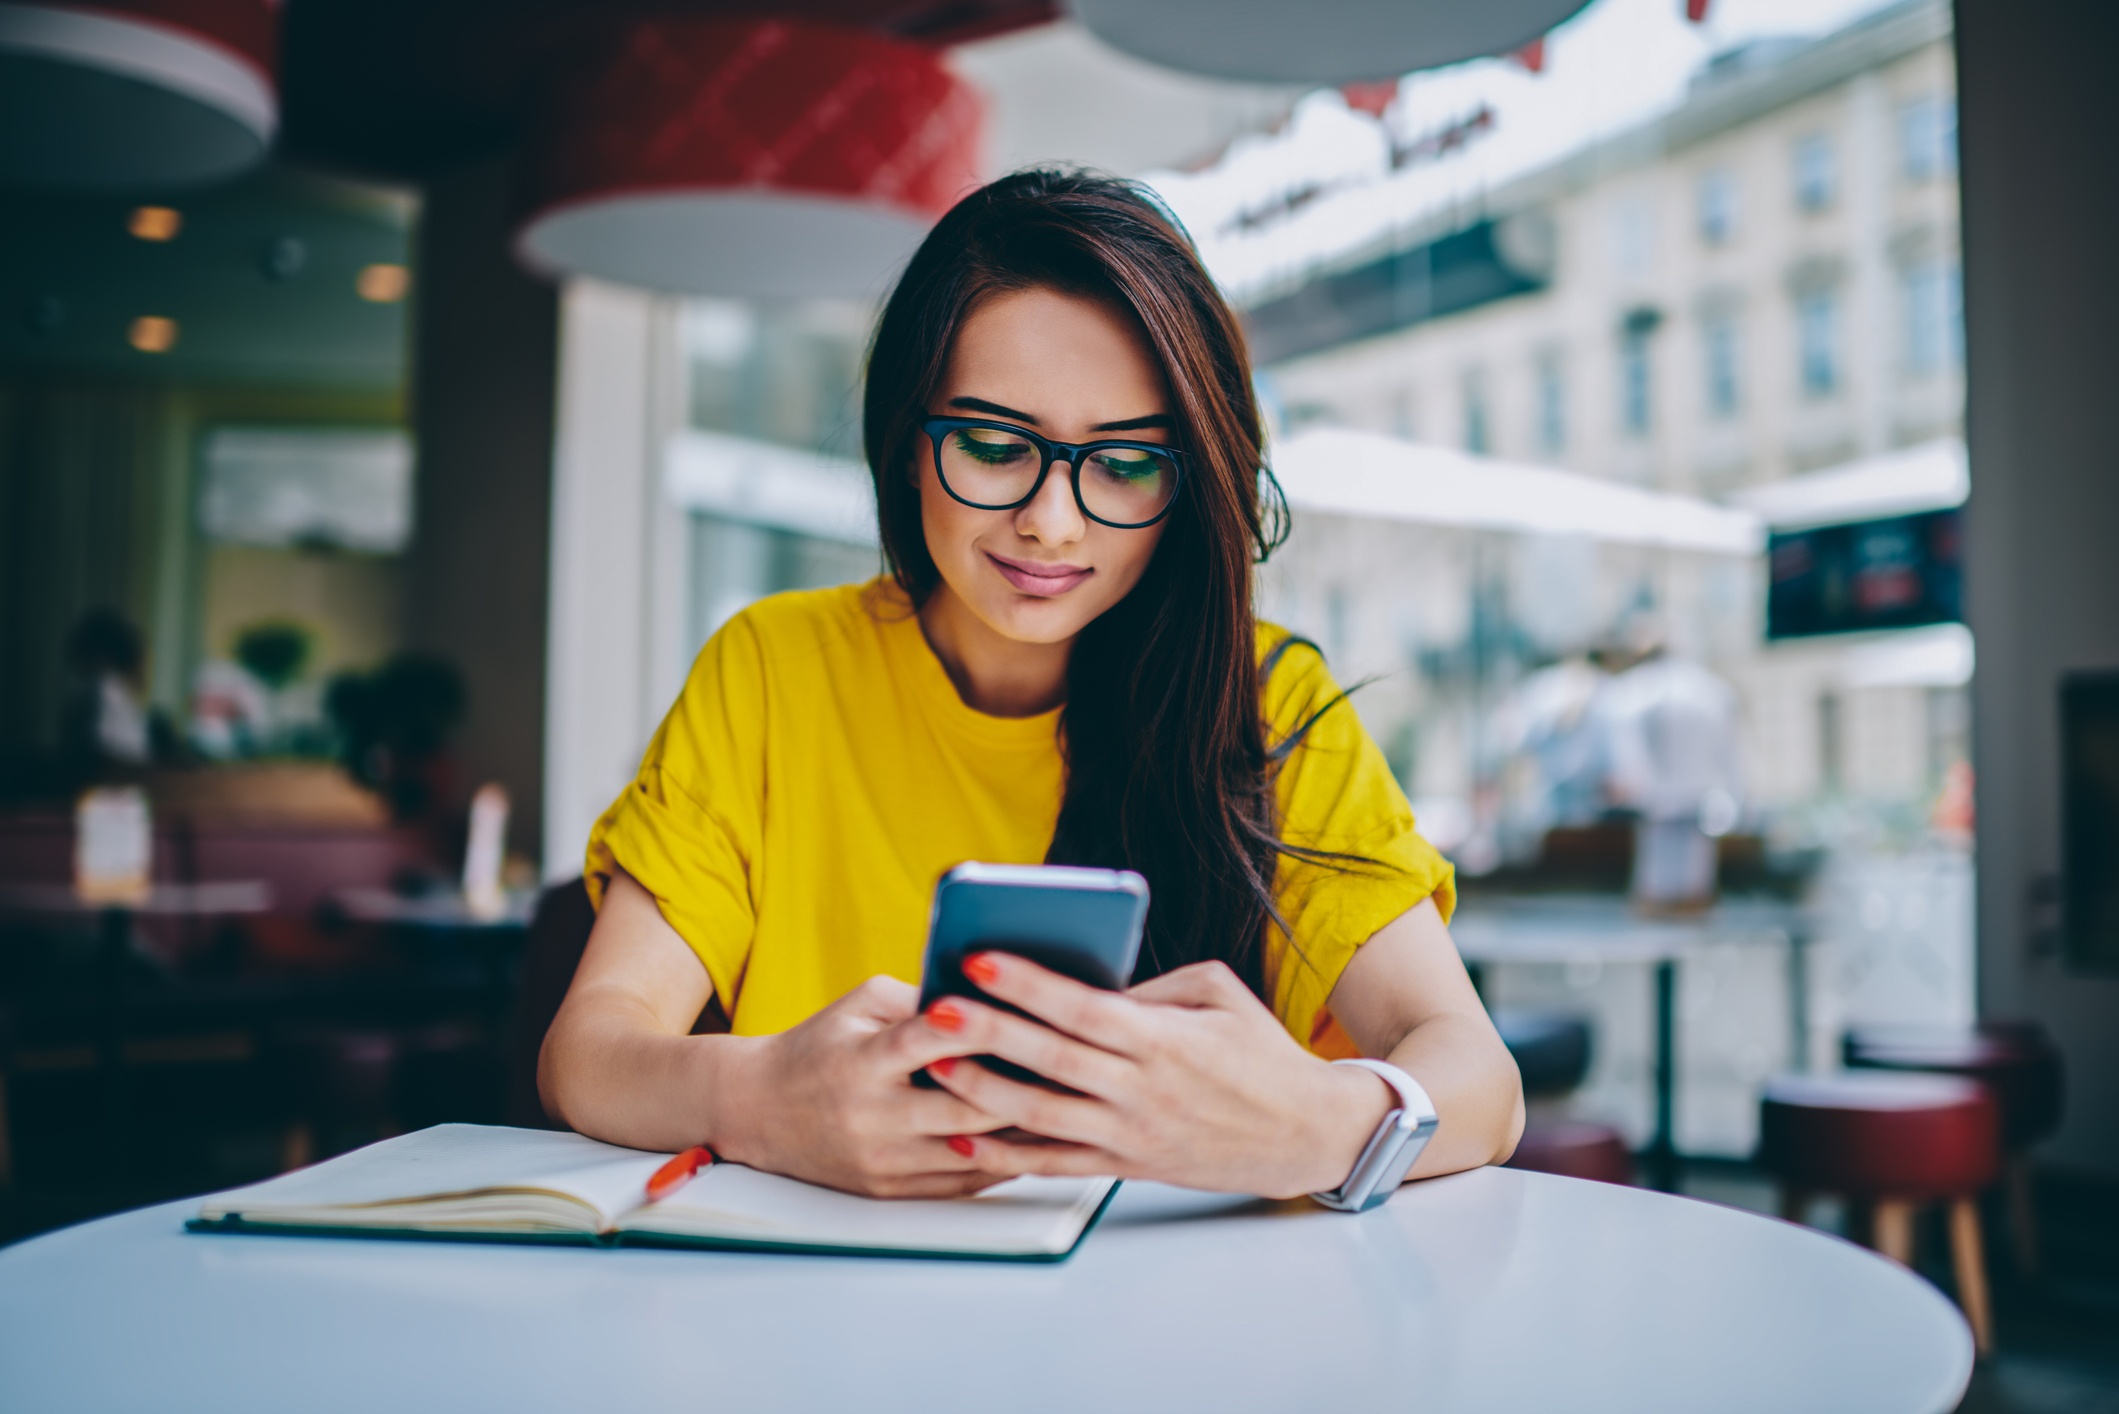 Woman in yellow shirt with glasses sitting at a table while looking at her phone